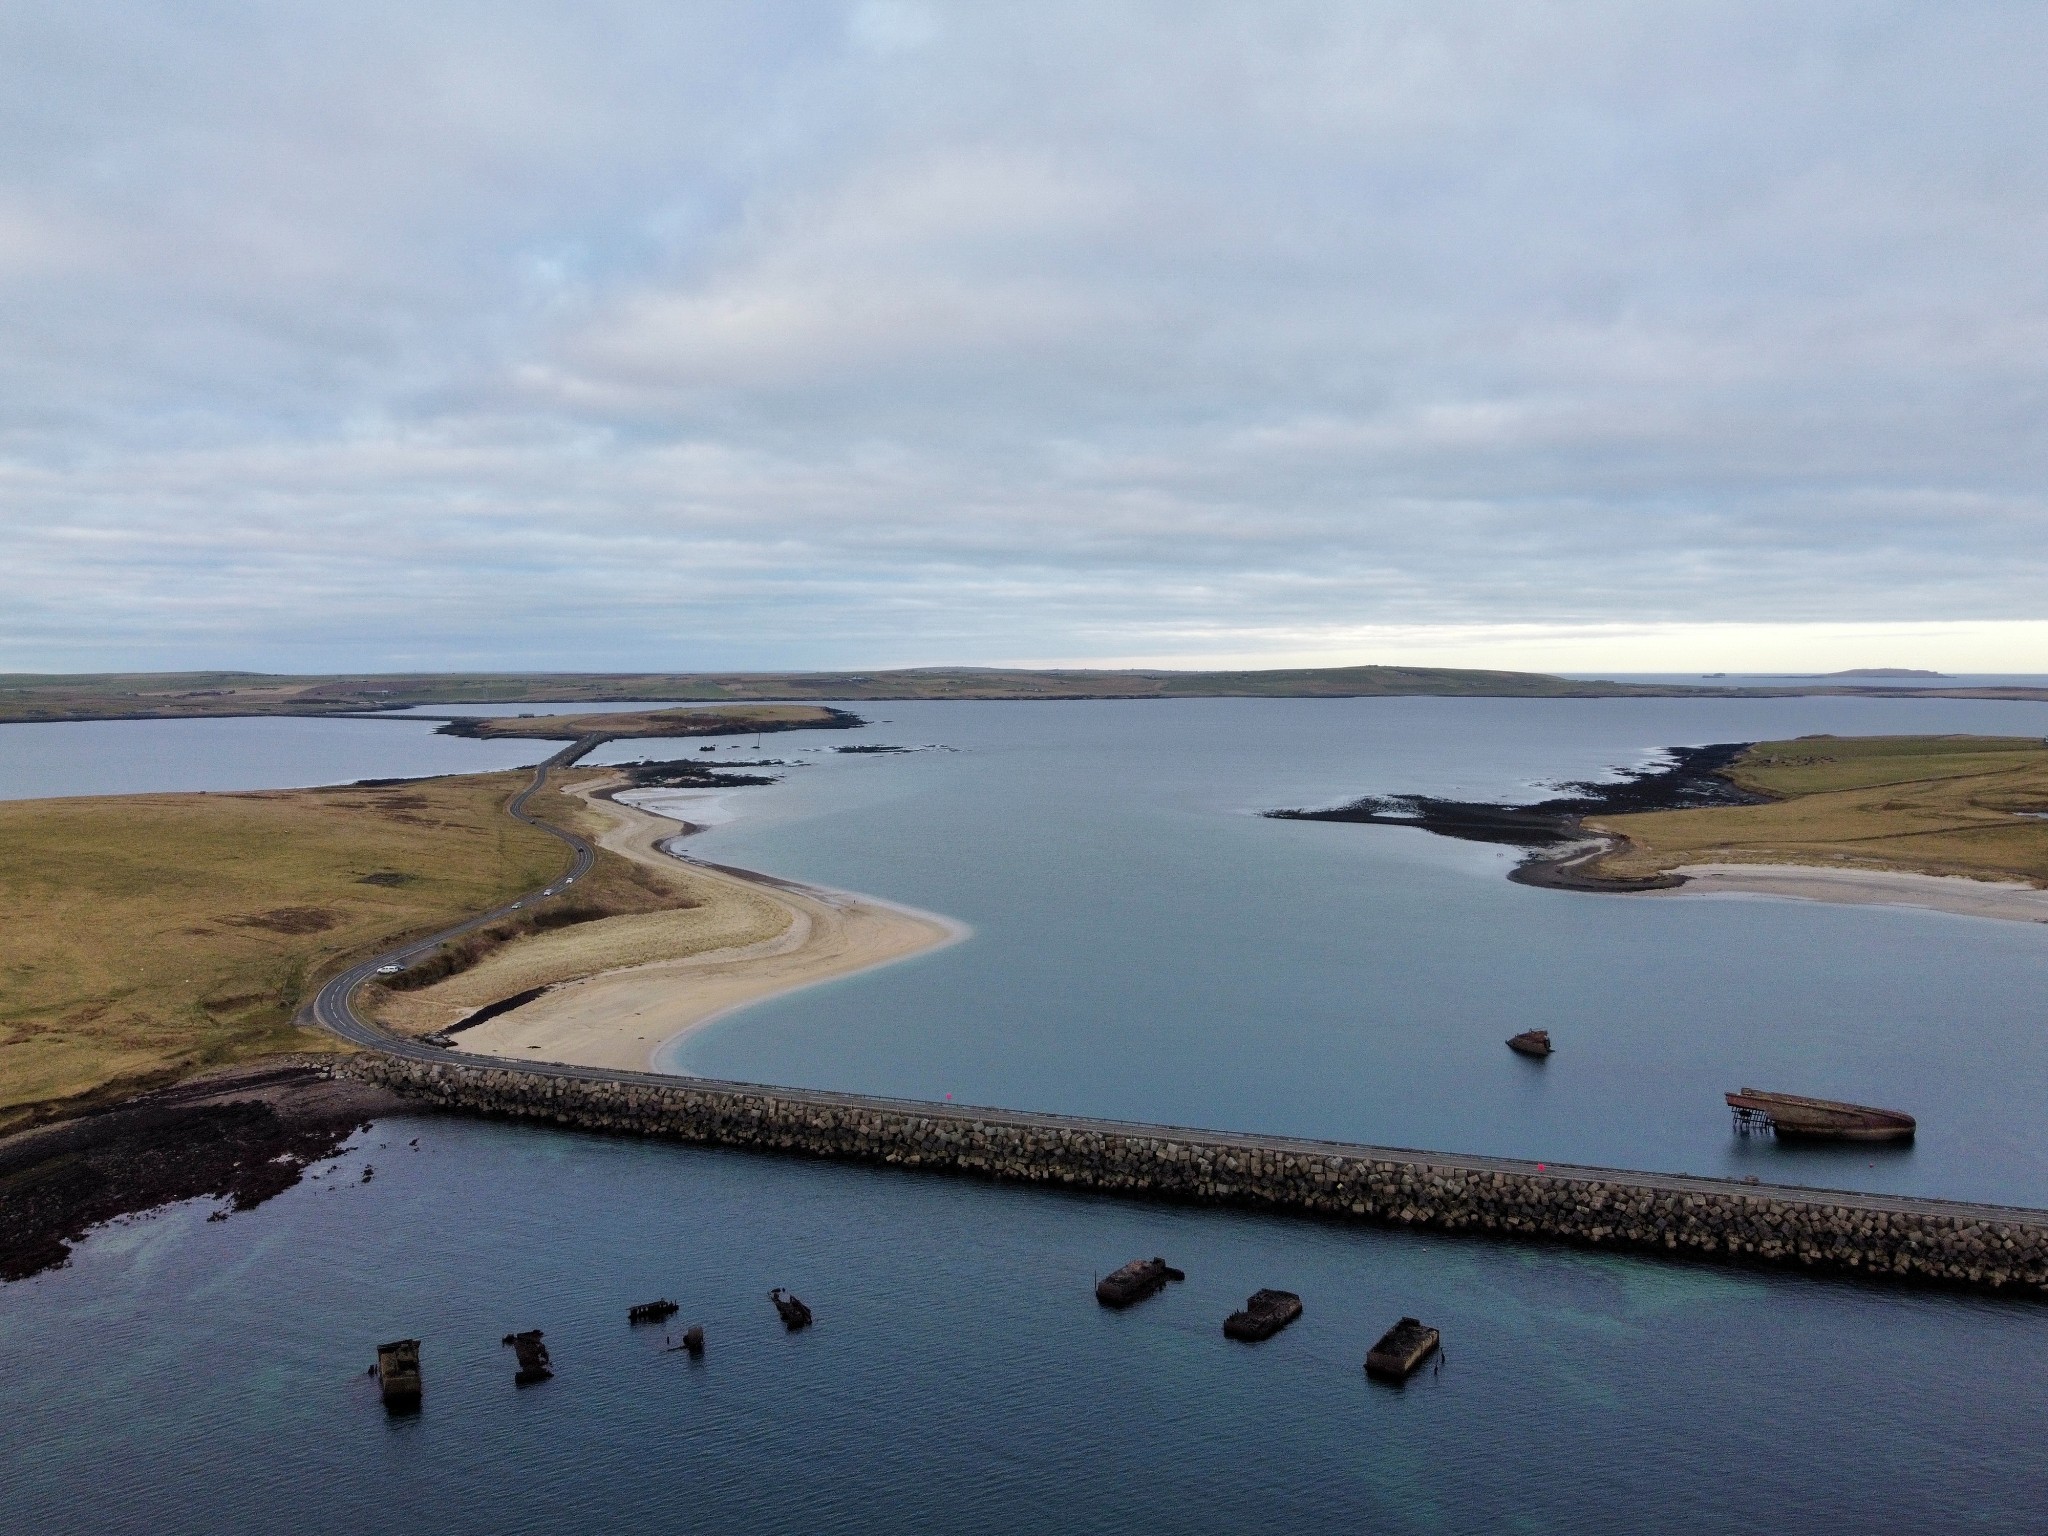 View over the Churchill Barriers, Orkney - image by Laura Cogle